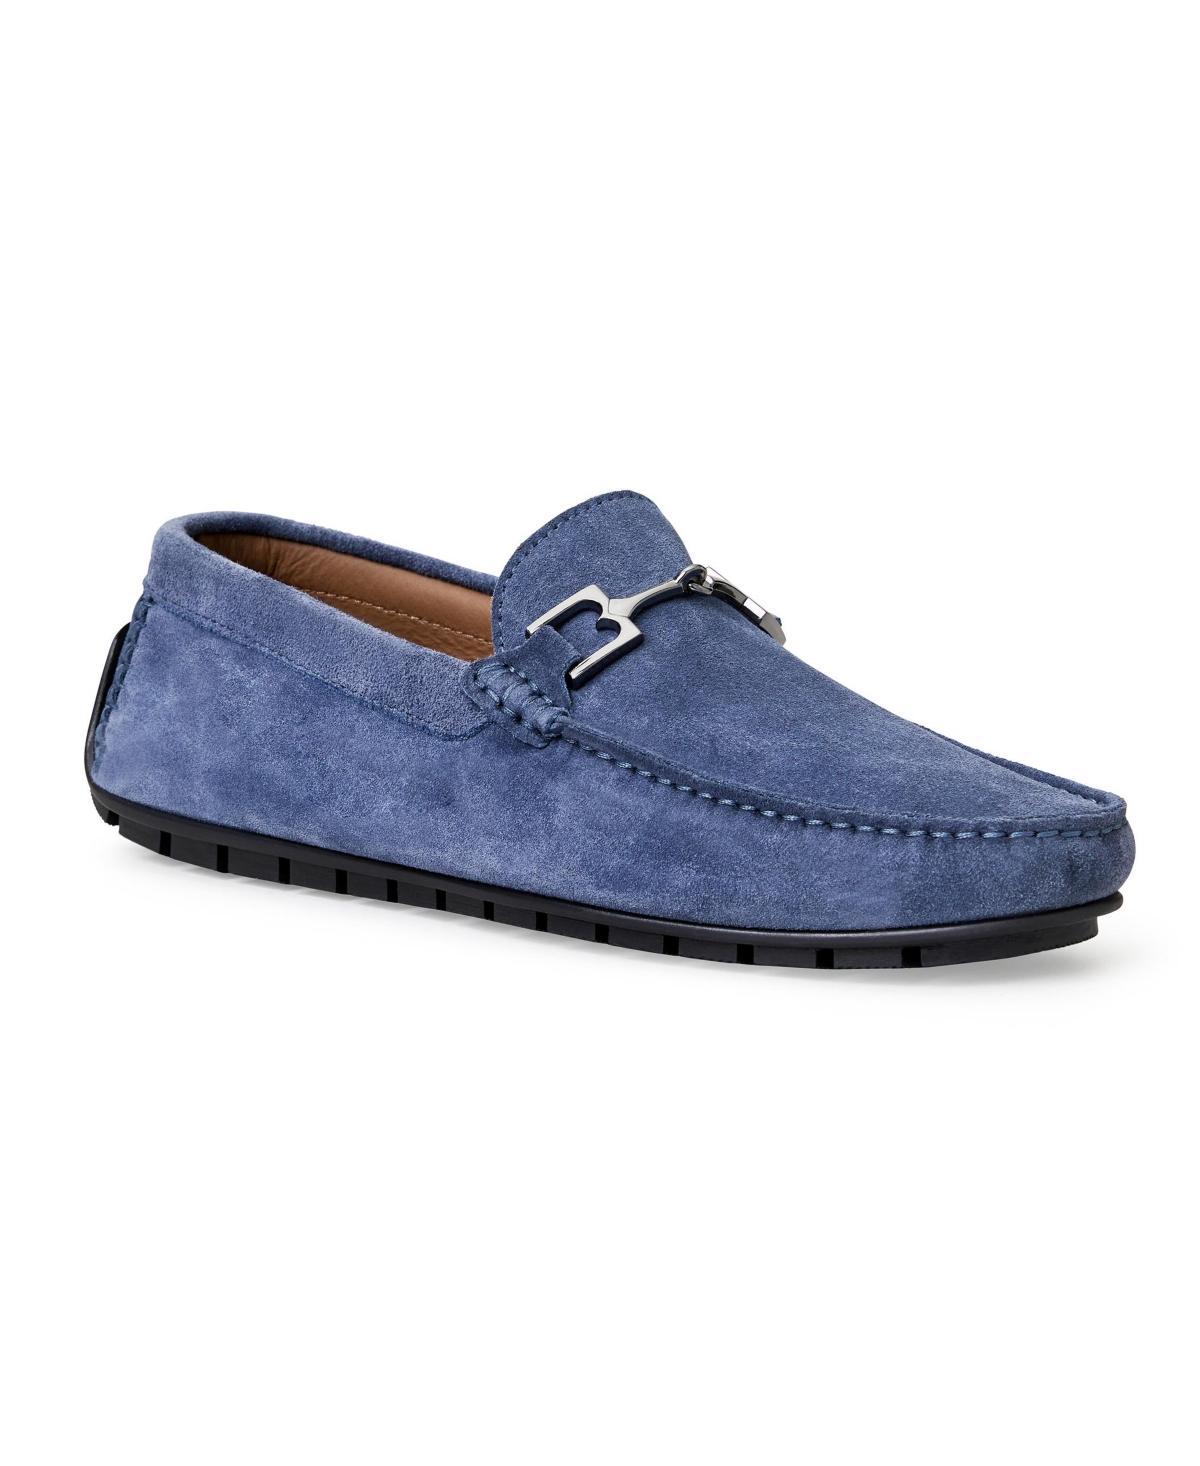 Bruno Magli Xander Driving Loafer Product Image